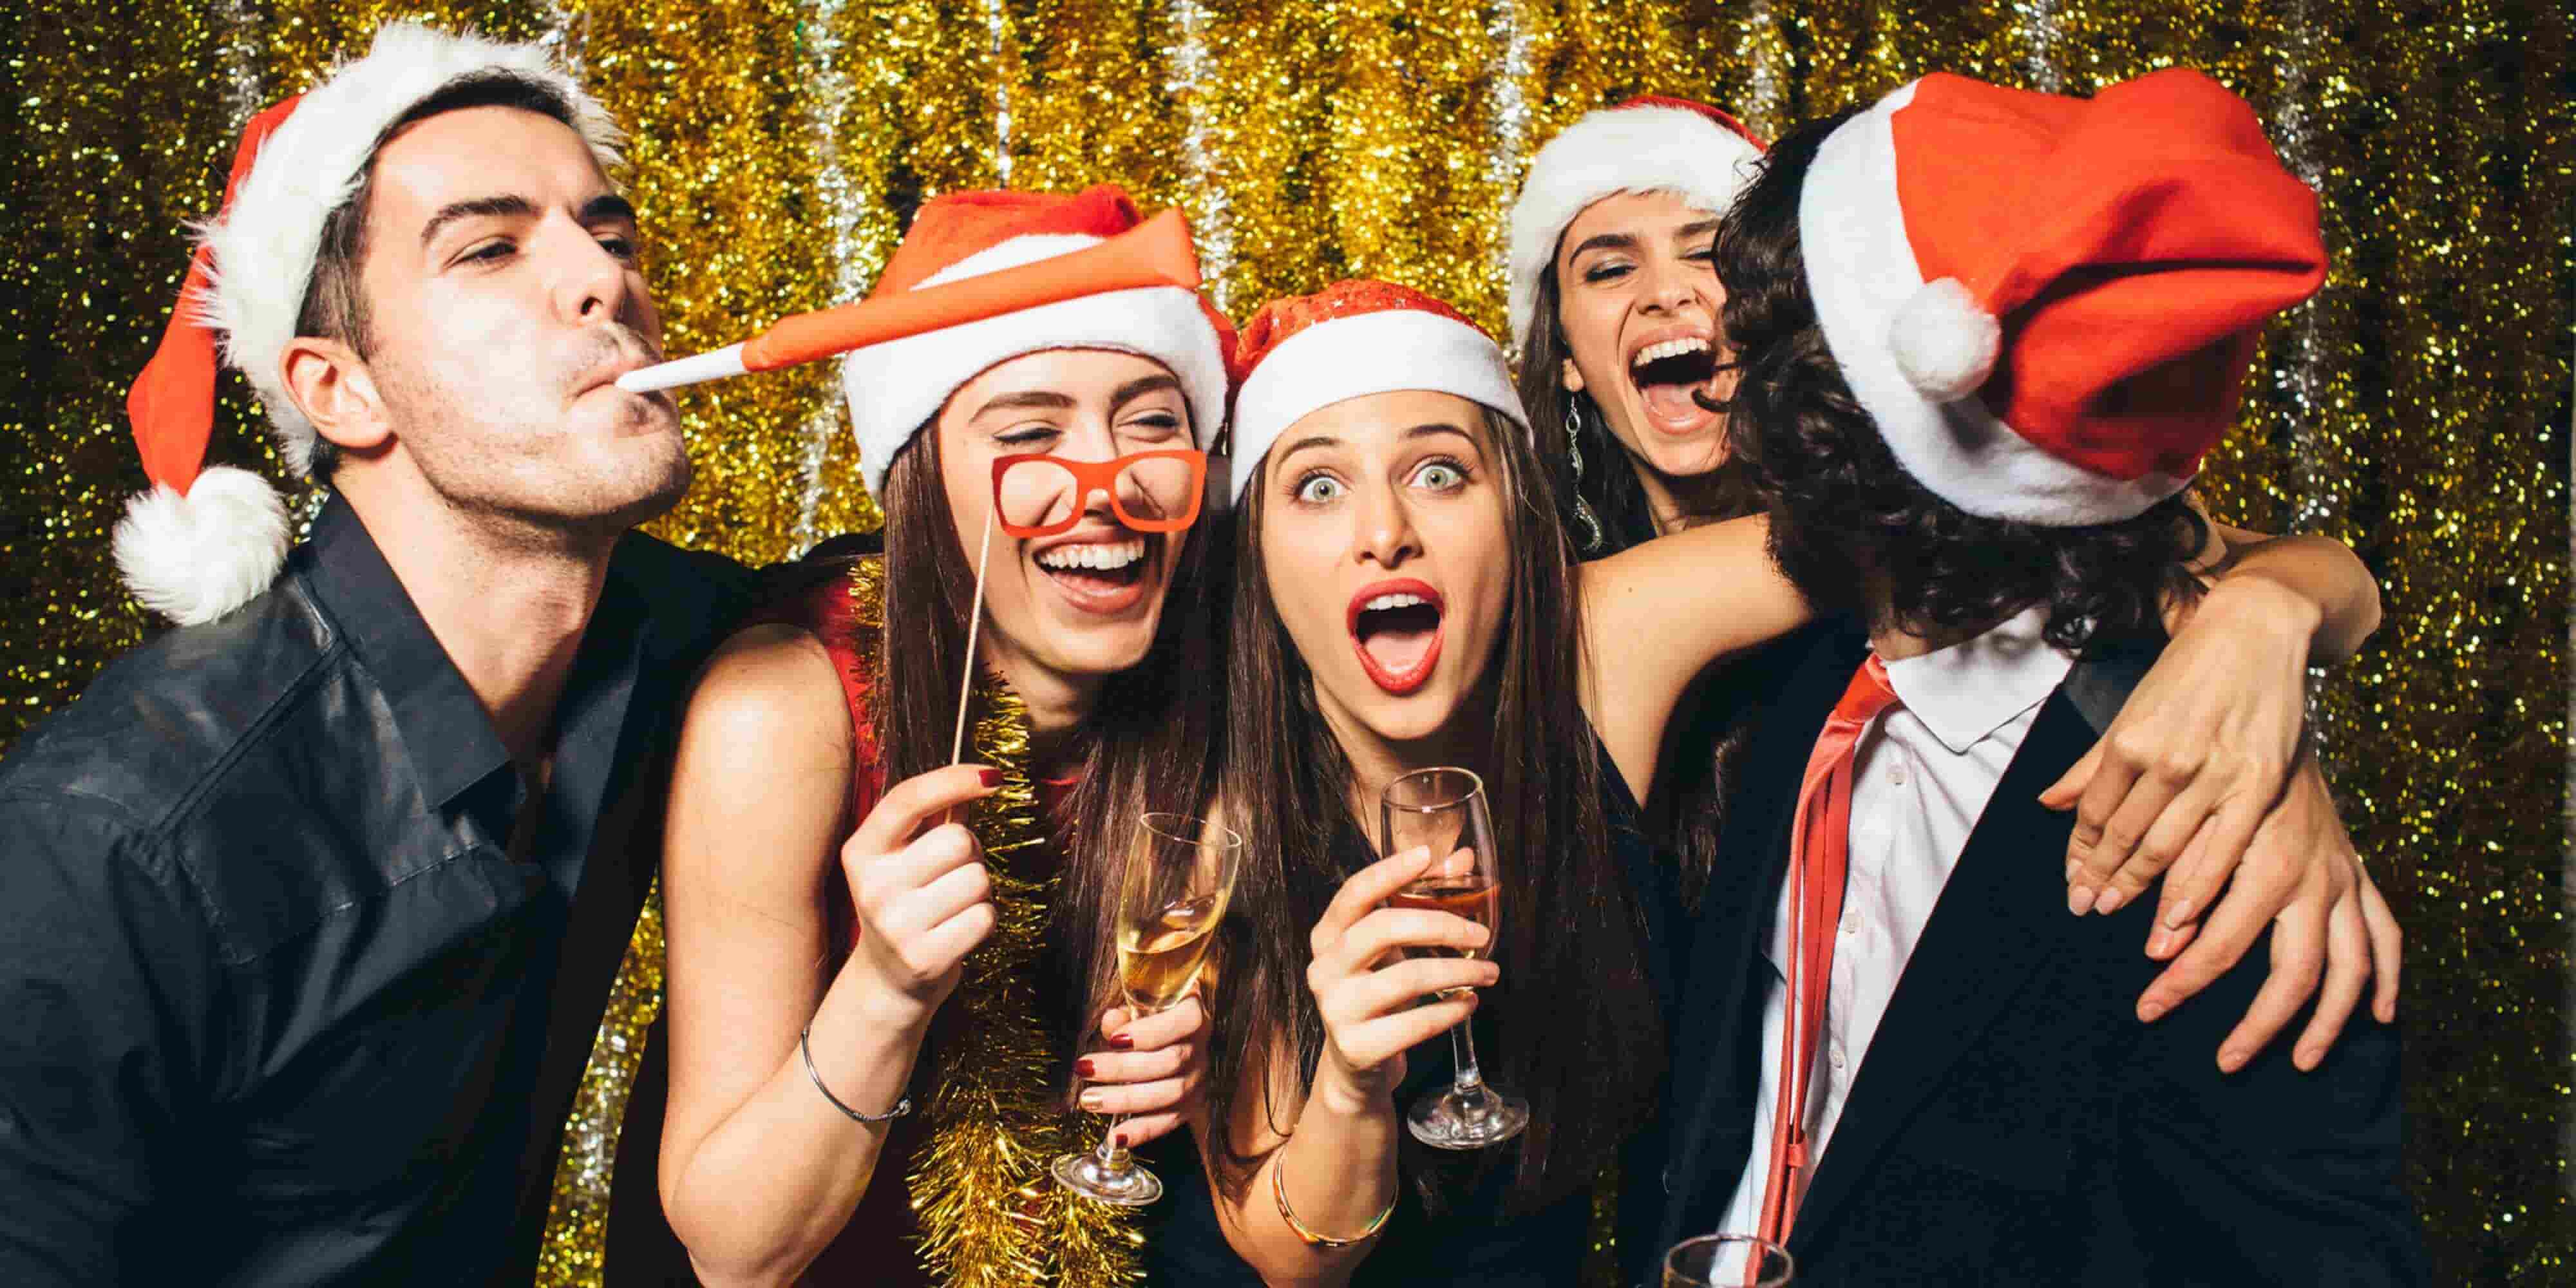 Costume Design Ideas for Christmas Party 